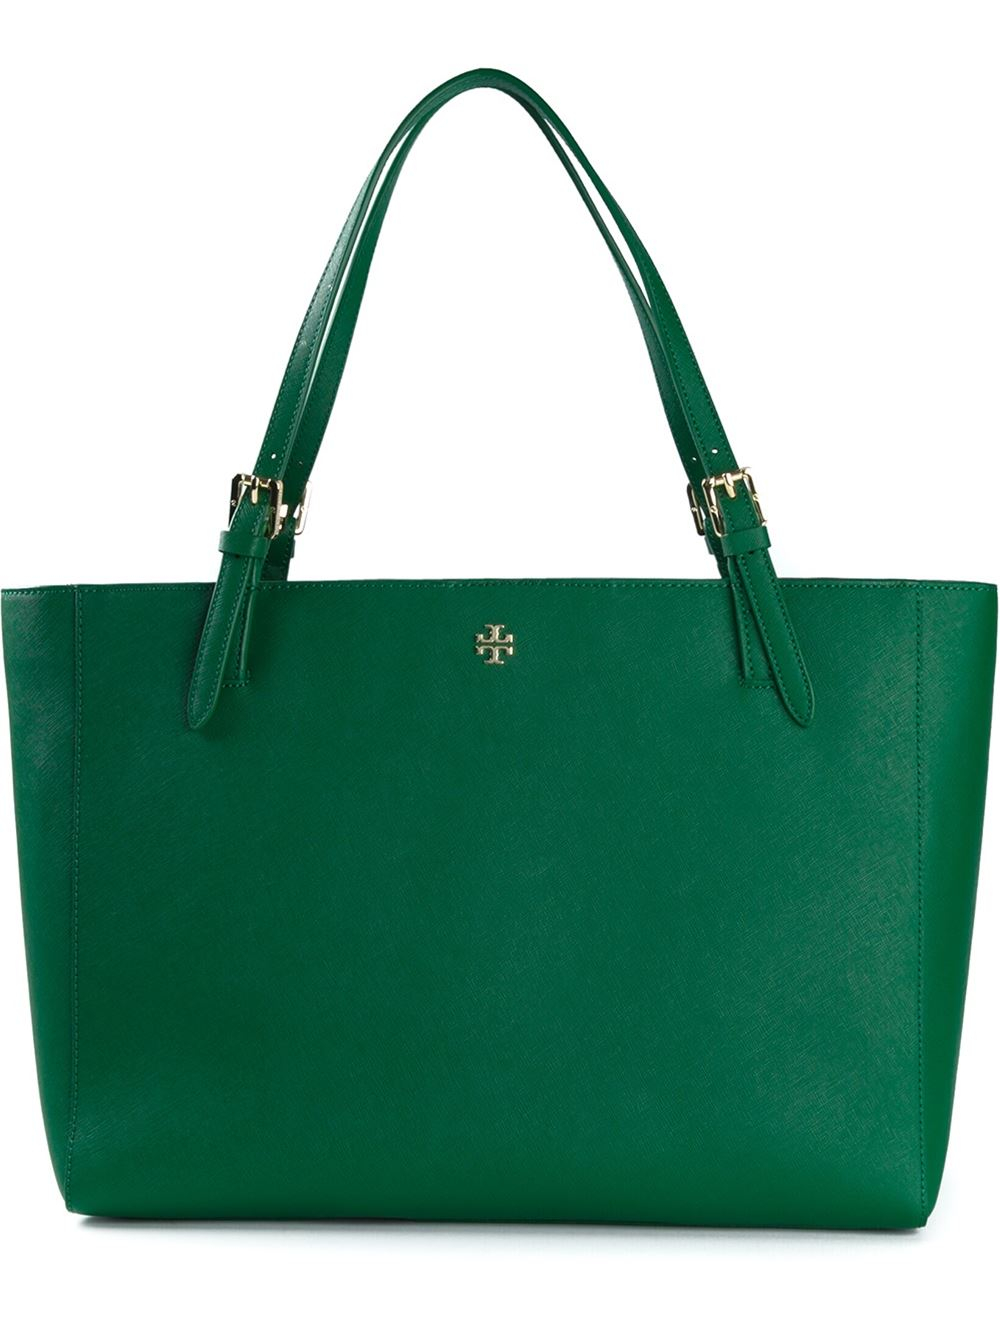 Lyst - Tory burch Large &#39;York&#39; Shopper Tote in Green